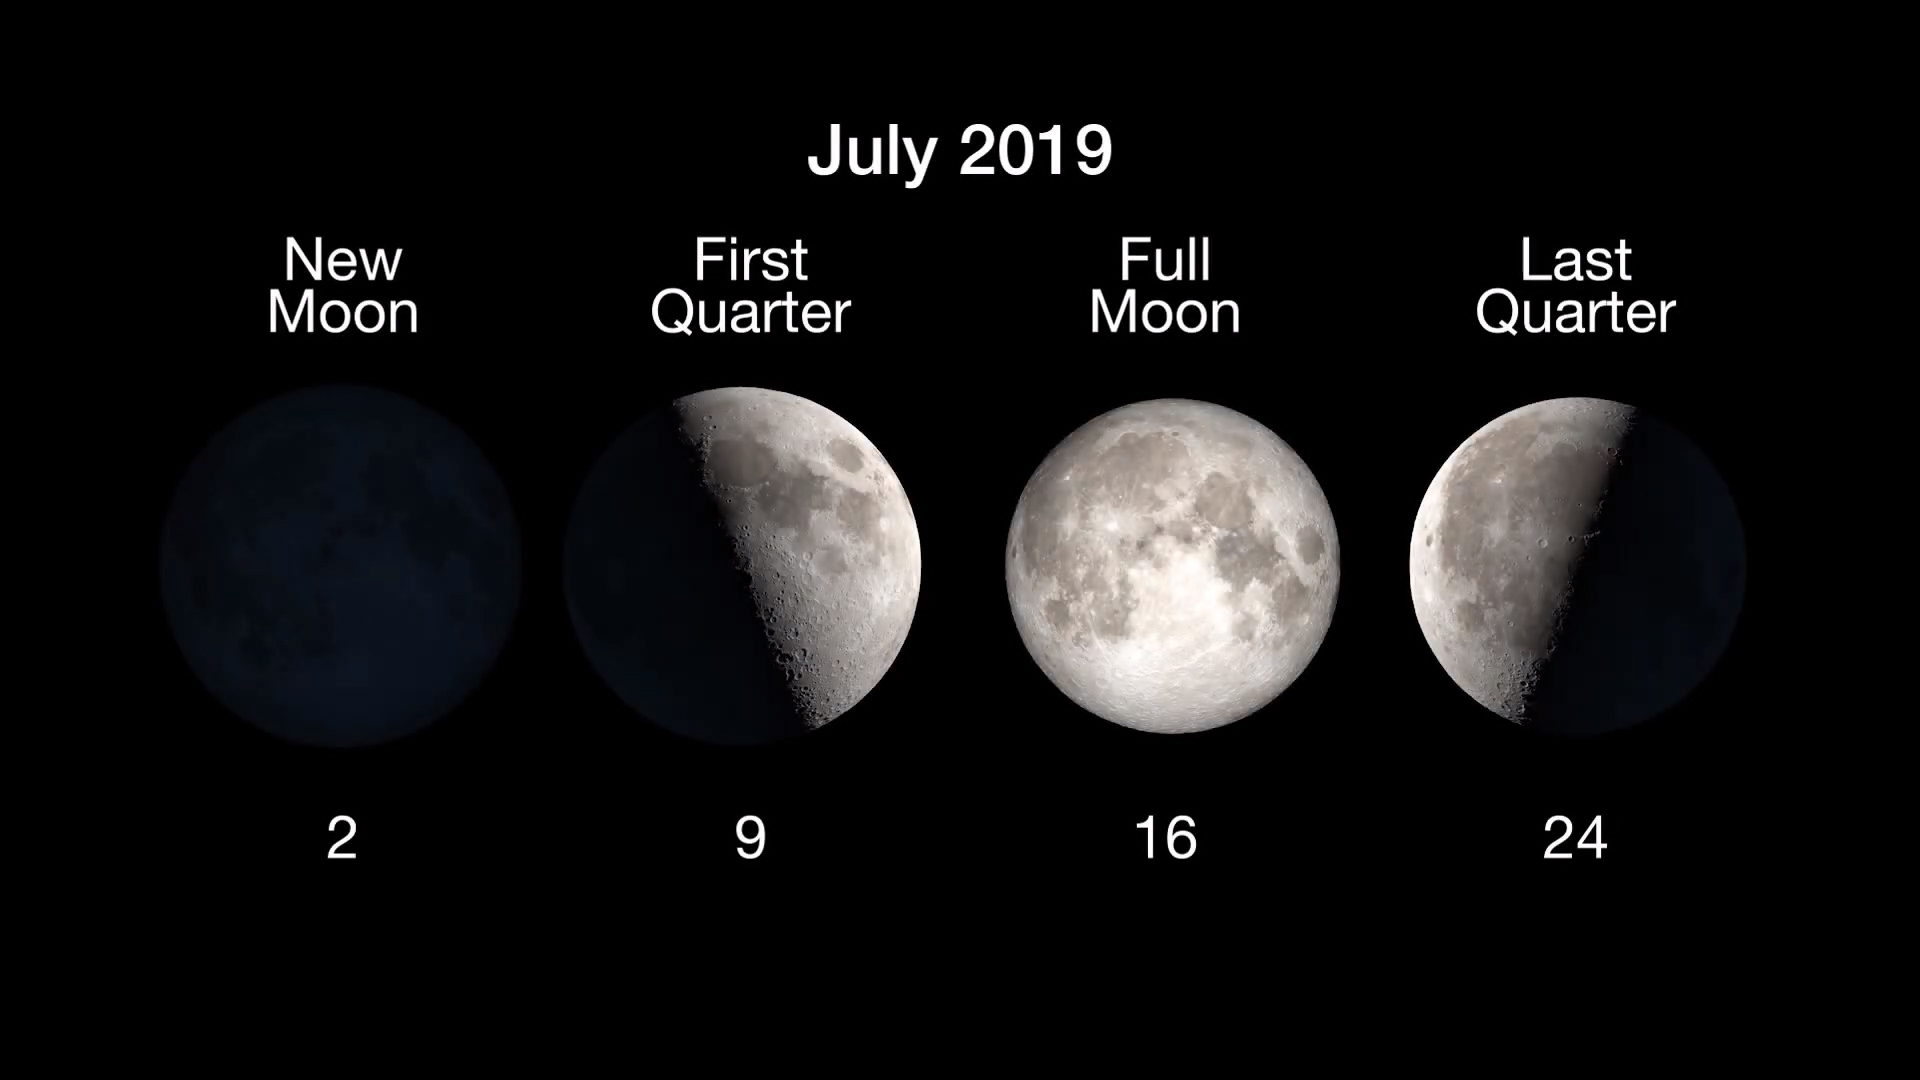 Moon phases July 2019: New Moon on July 2, first quarter on July 9, full Moon on July 16 and last quarter on July 24.